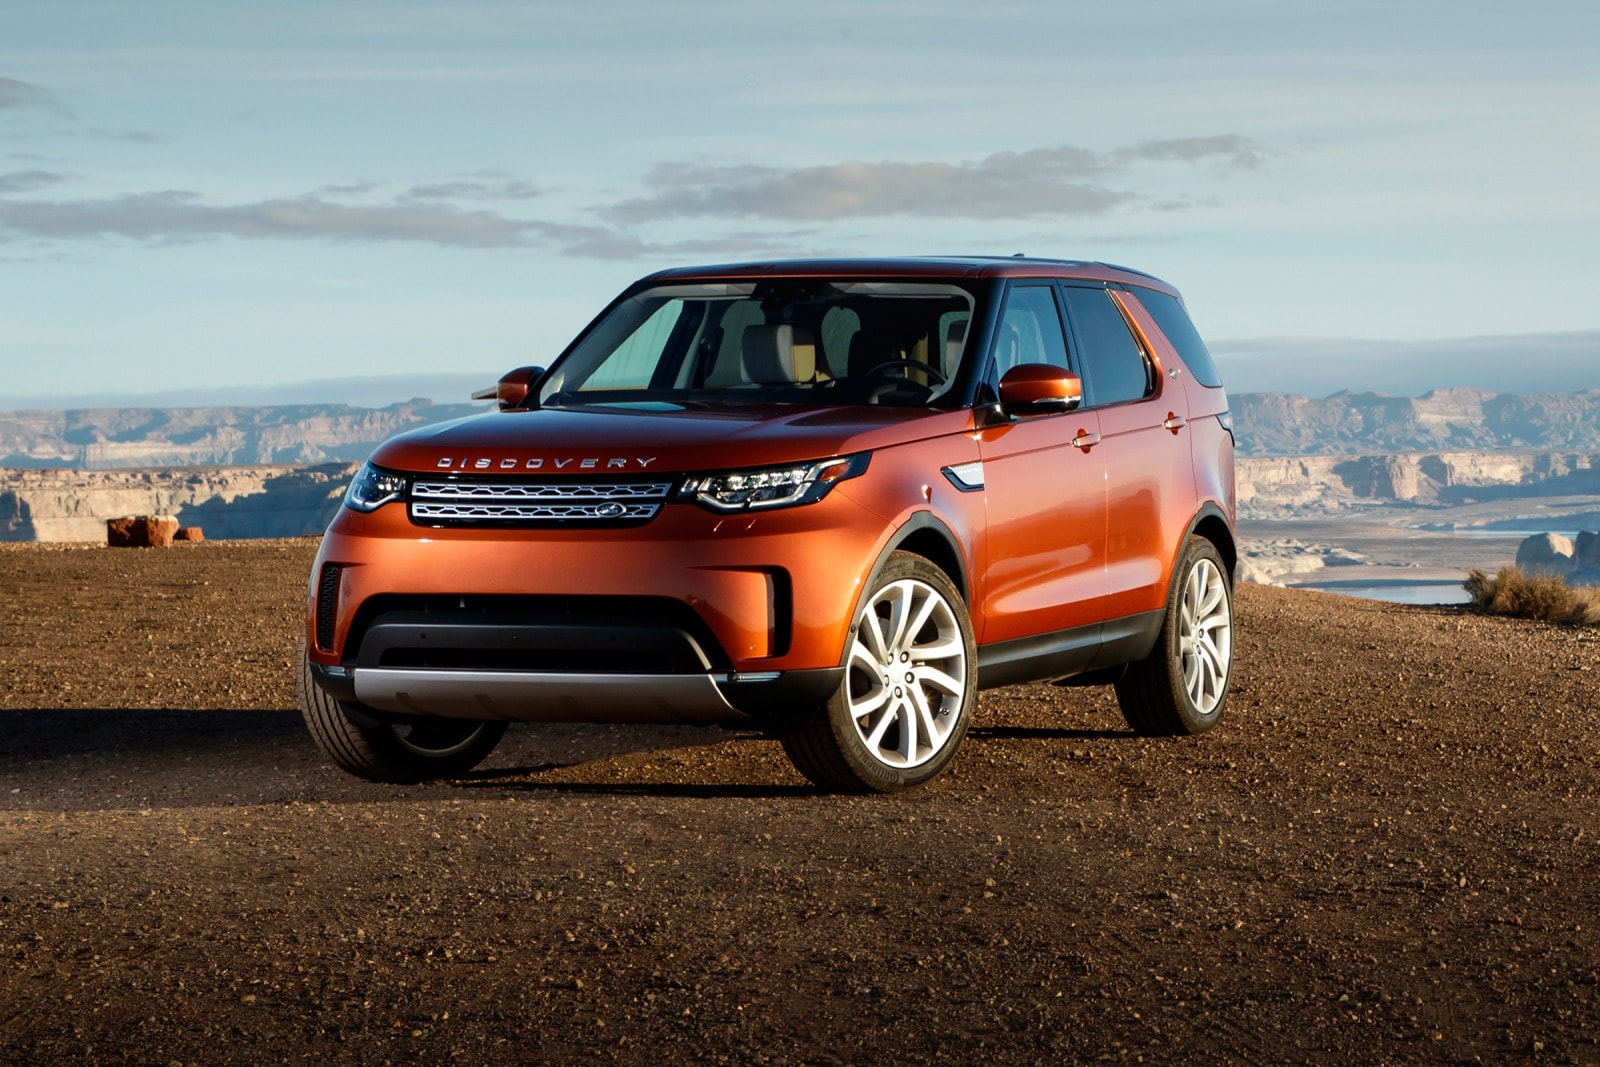 Nylon Cyclops Clancy 2017 Land Rover Discovery Review & Ratings | Edmunds